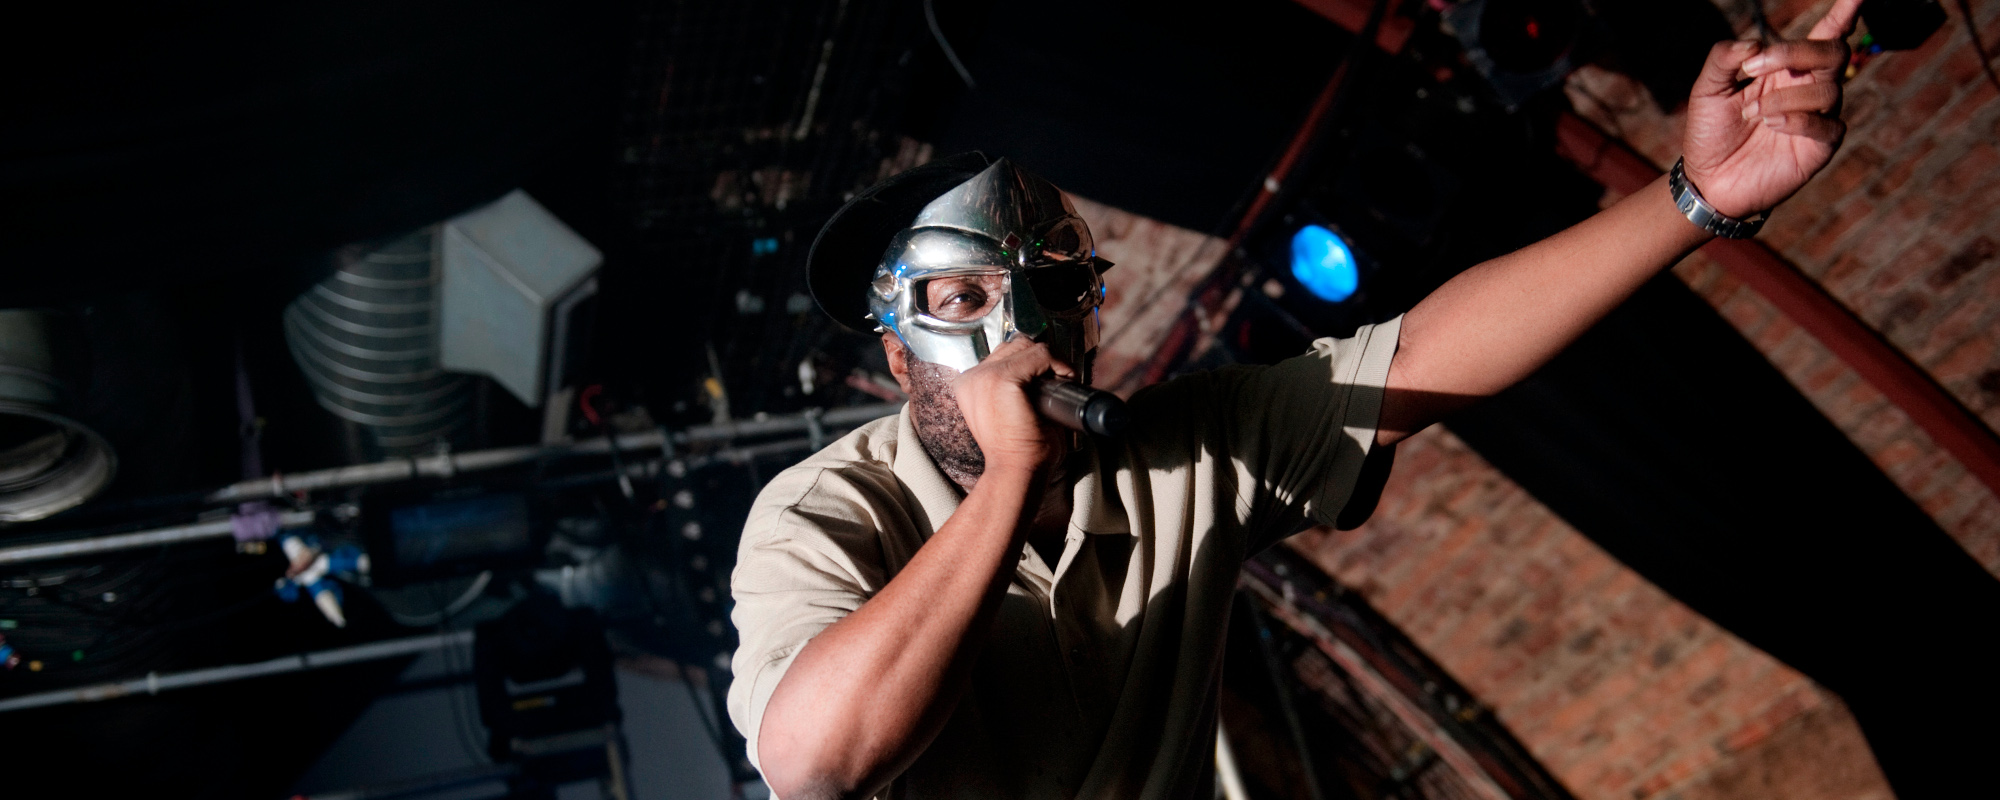 MF DOOM’s Cause of Death Made Public, Widow Confronts Hospital for Malpractice